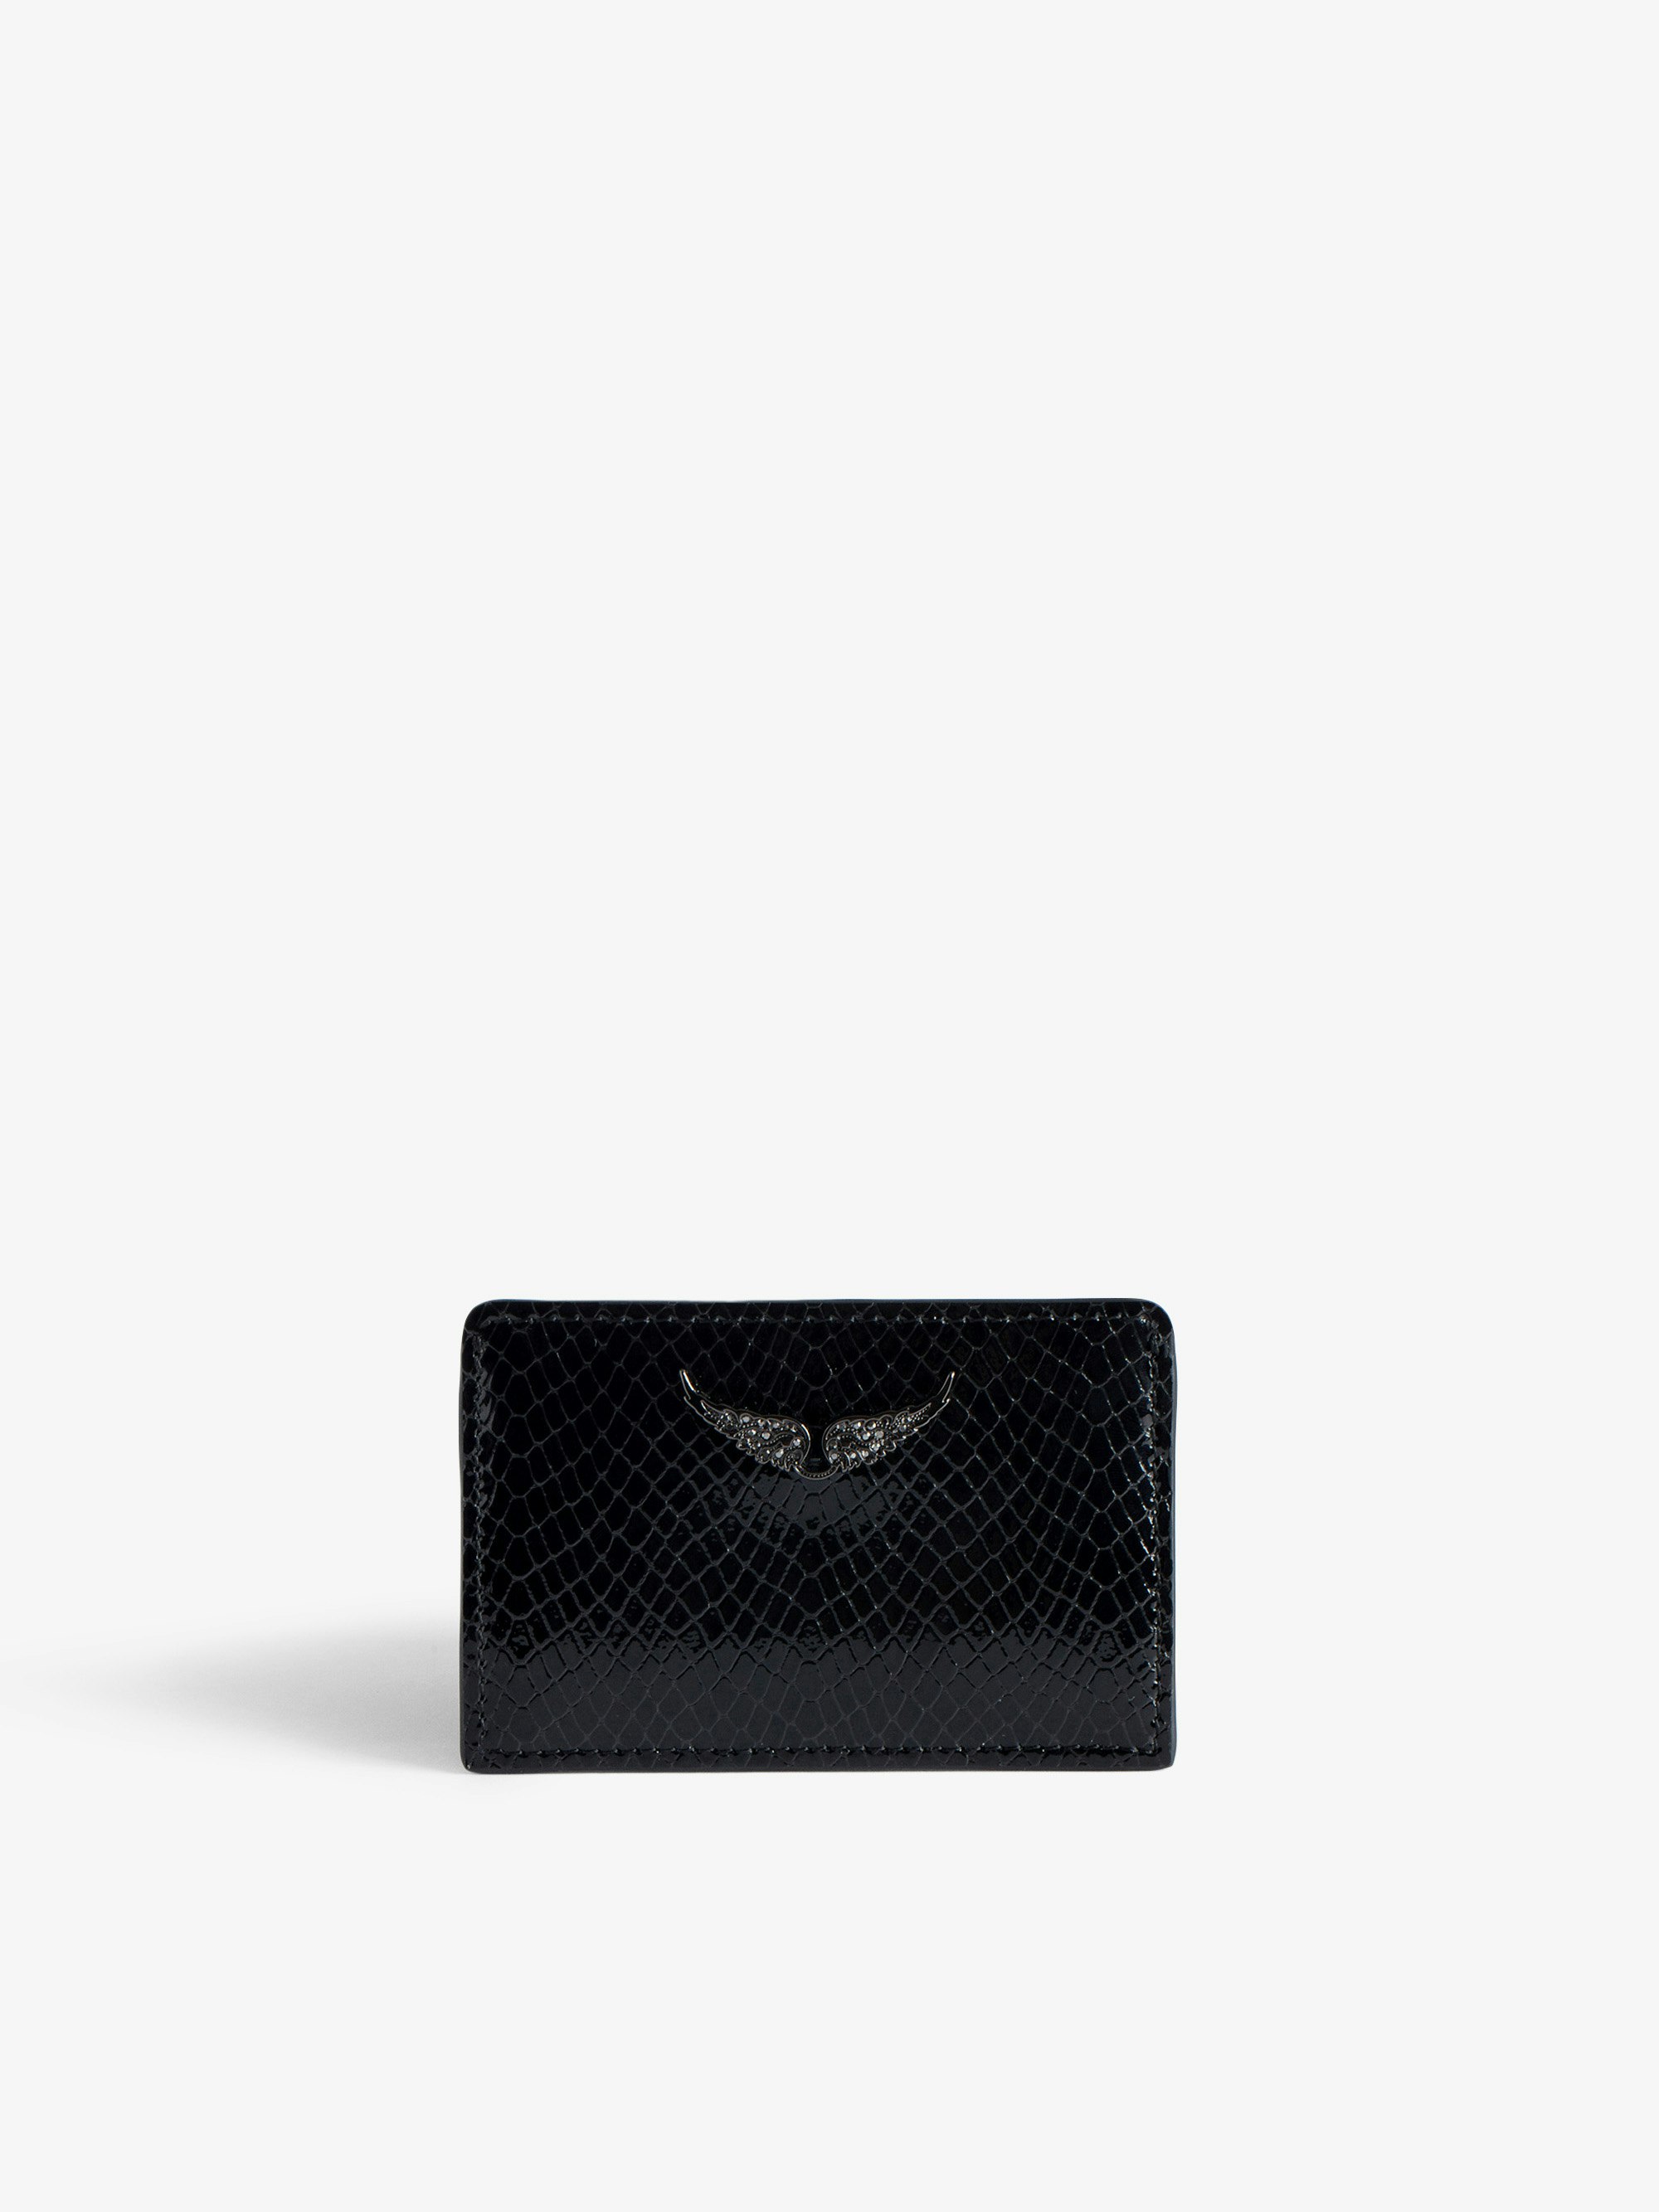 ZV Pass Glossy Wild Embossed Card Holder - Women’s black python-effect patent leather card holder with diamanté wings charm.